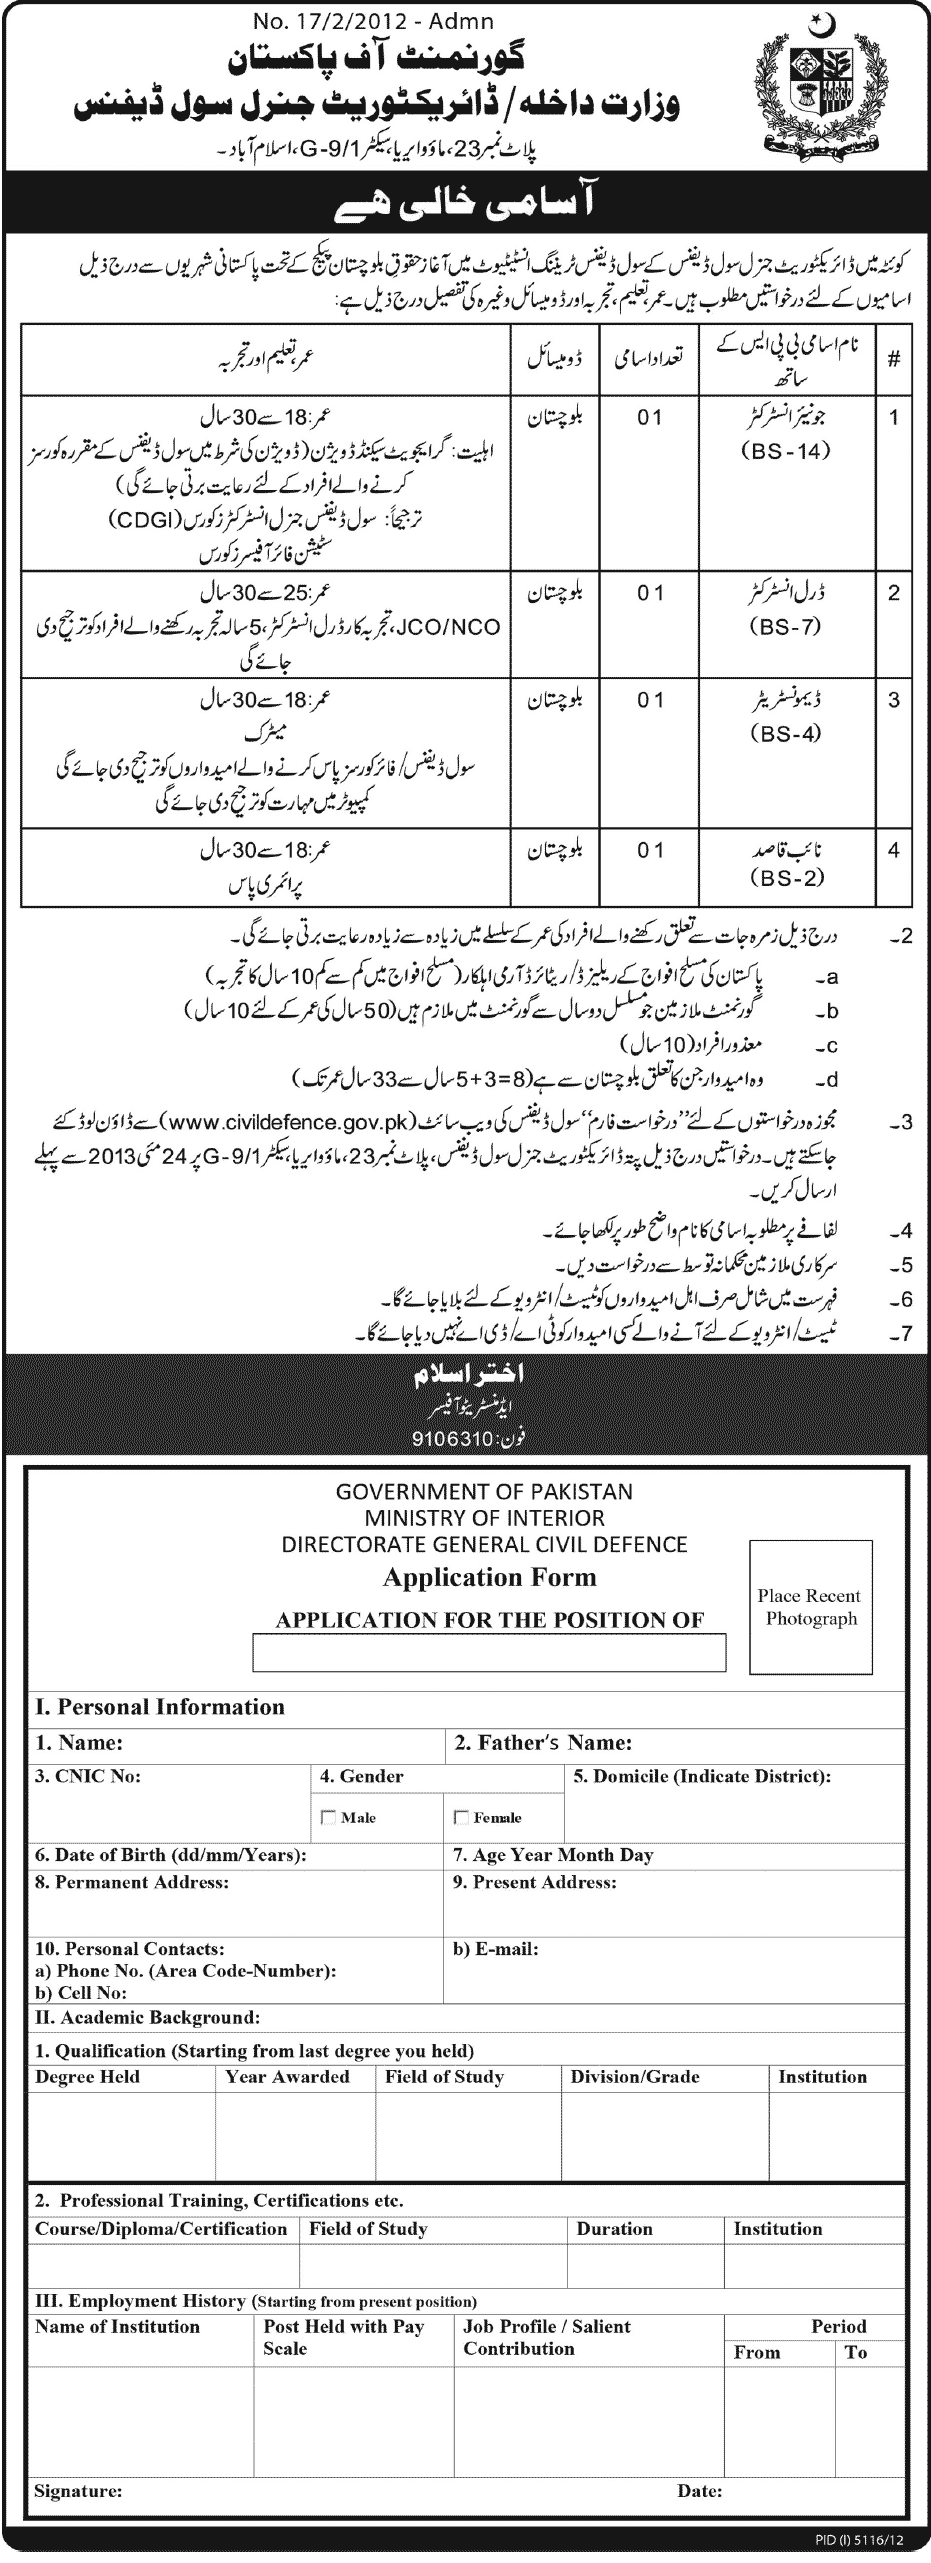 Government of Pakistan Jobs in Quetta May 2013